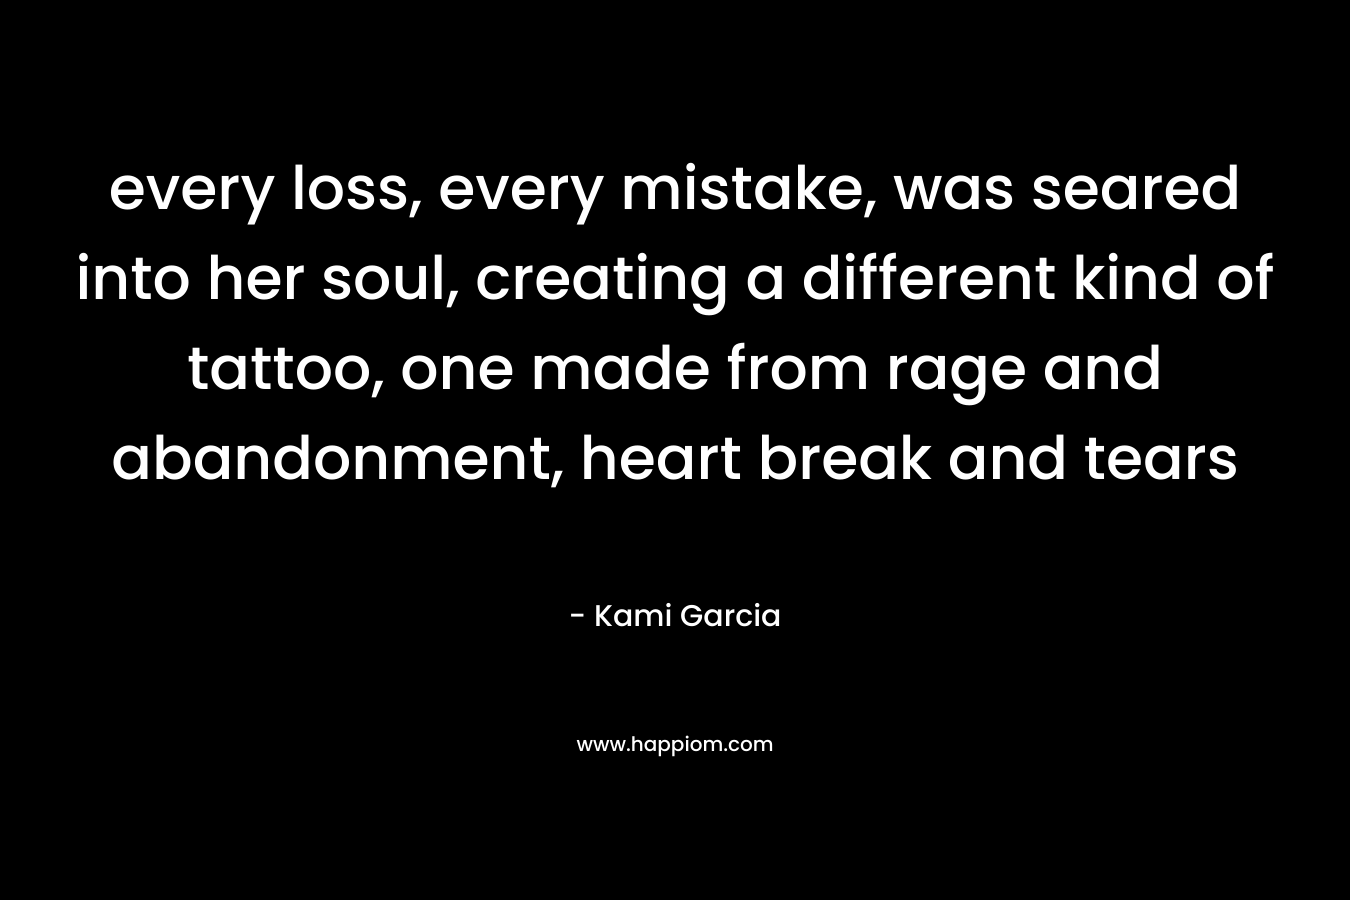 every loss, every mistake, was seared into her soul, creating a different kind of tattoo, one made from rage and abandonment, heart break and tears – Kami Garcia